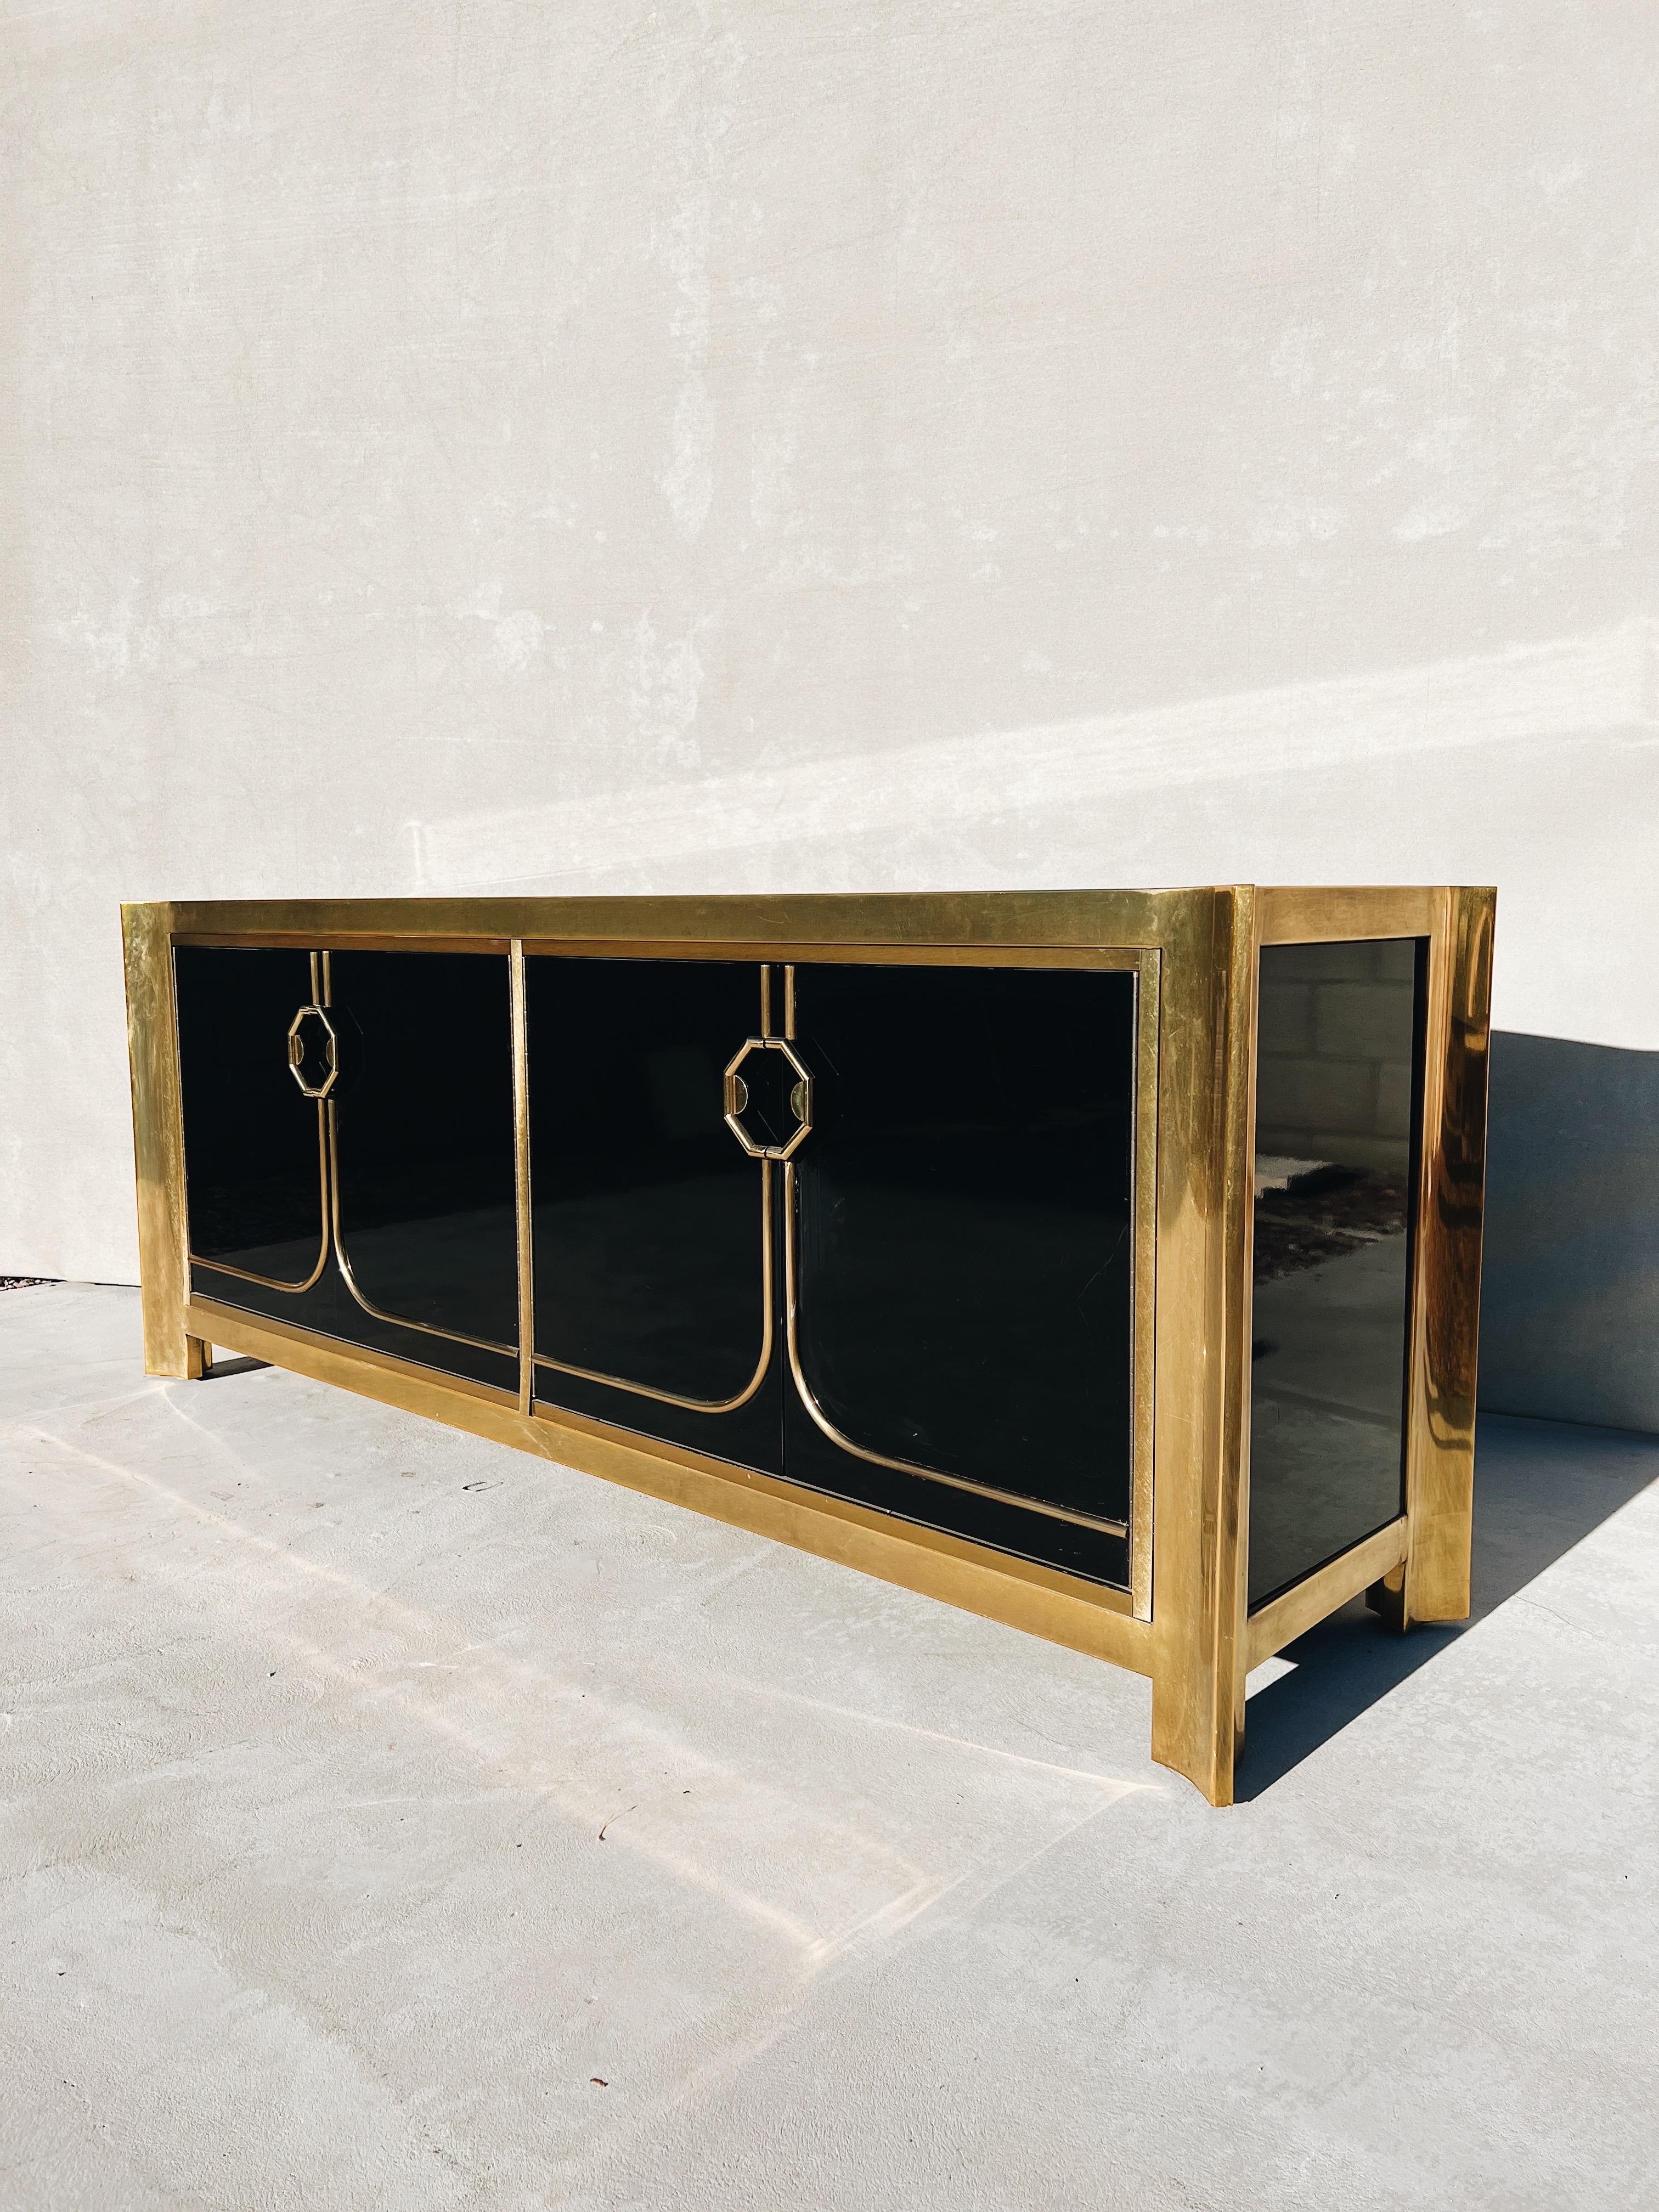 Vintage Mastercraft Brass and Black Lacquer Sideboard

A beautifully dramatic and style forward credenza created by Mastercraft Furniture Company and designed by William Doezema - where the quality of materials and finishes were executed to an